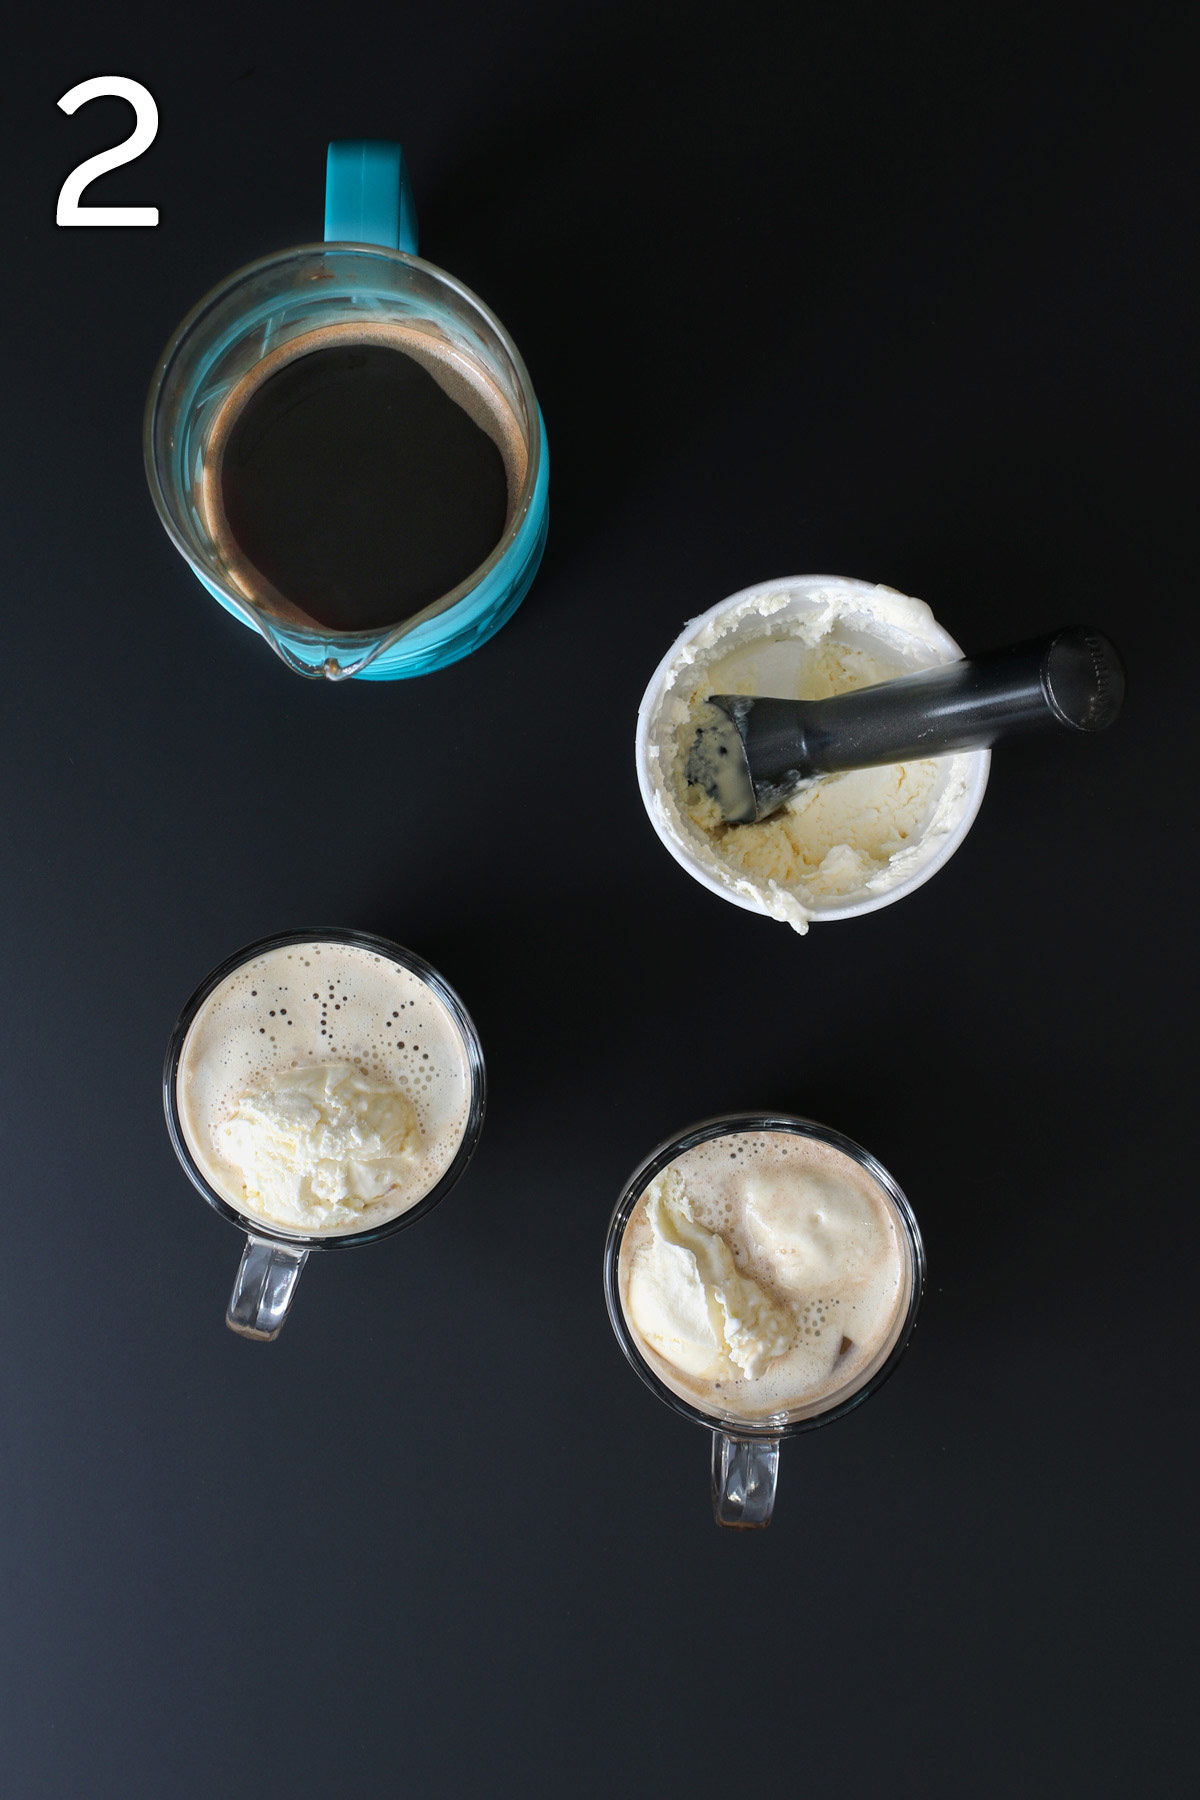 scoops of ice cream are added to mugs of coffee, French press is nearby with a pint of ice cream with a scoop in it.